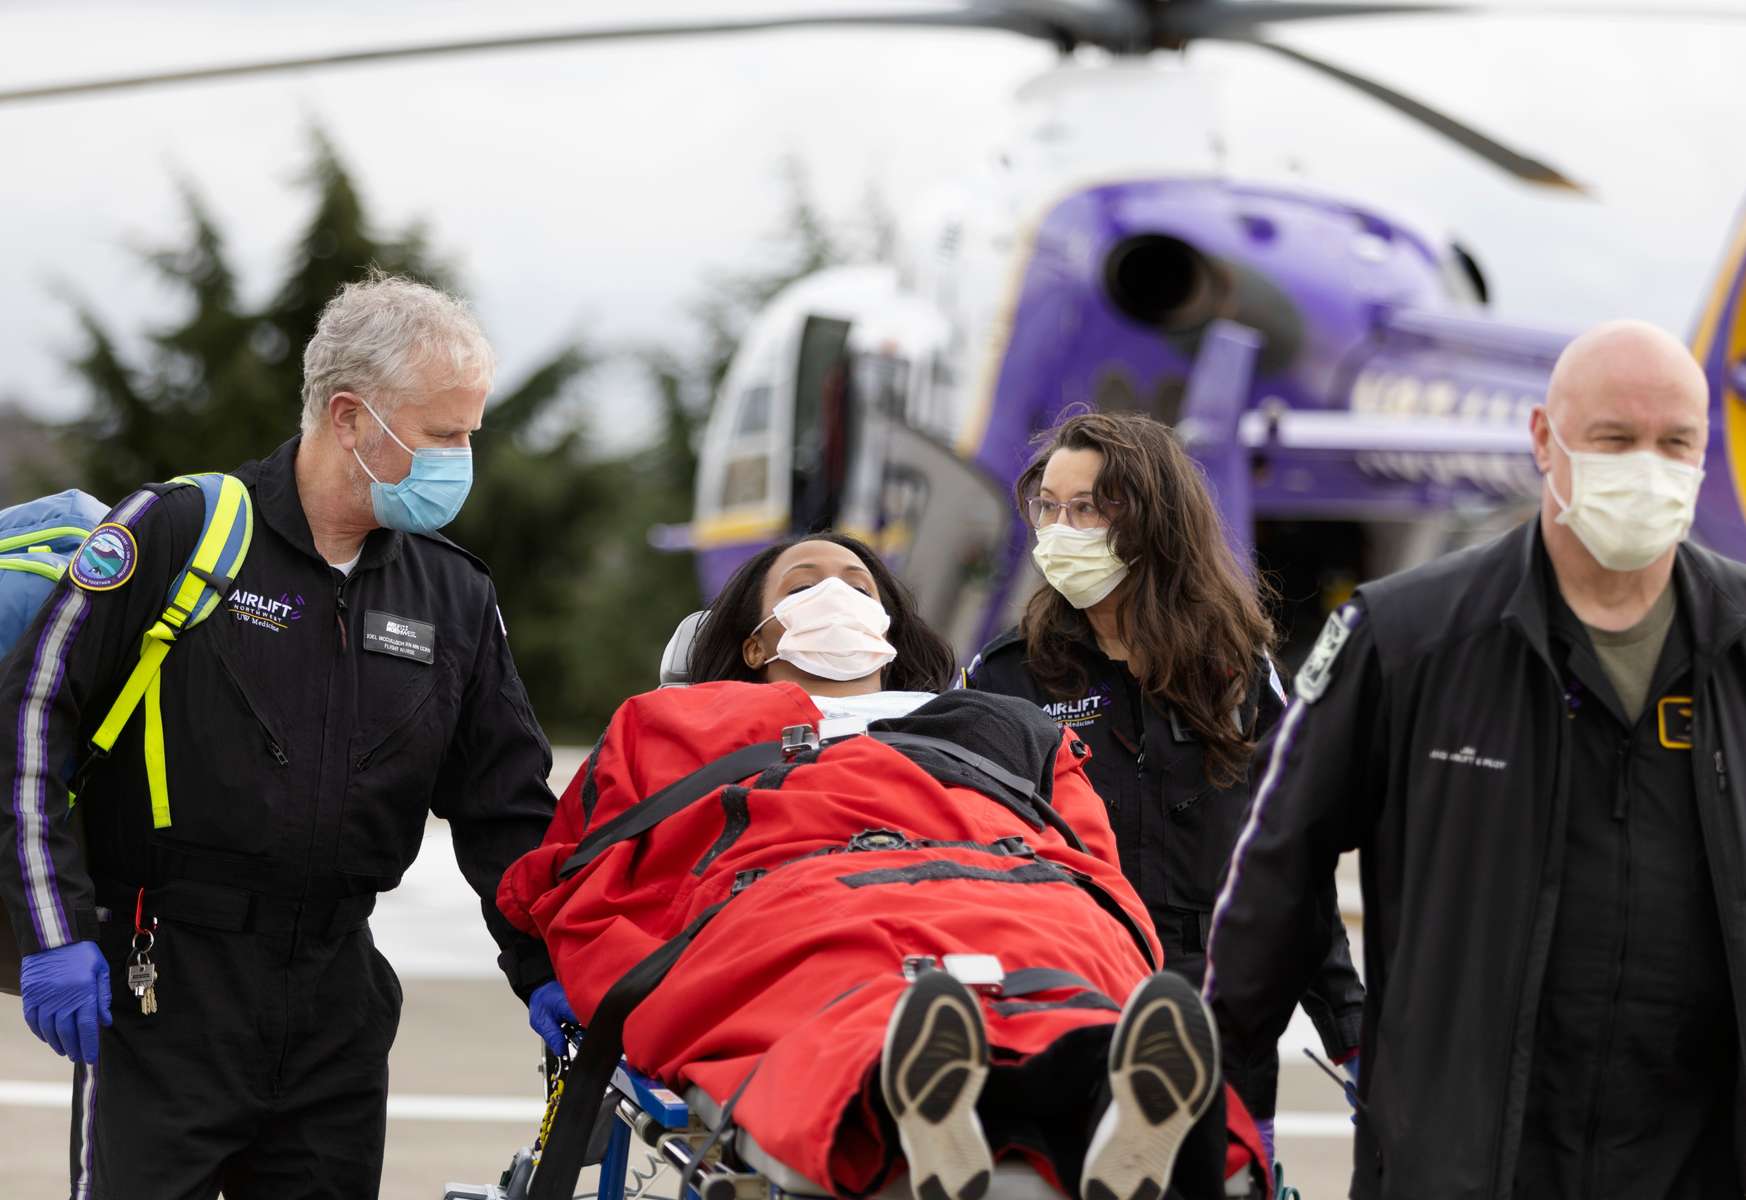 Harborview Hospital ICU nurses and Airlift staff at work. Feb 13, 2023. Photo by Ron Wurzer